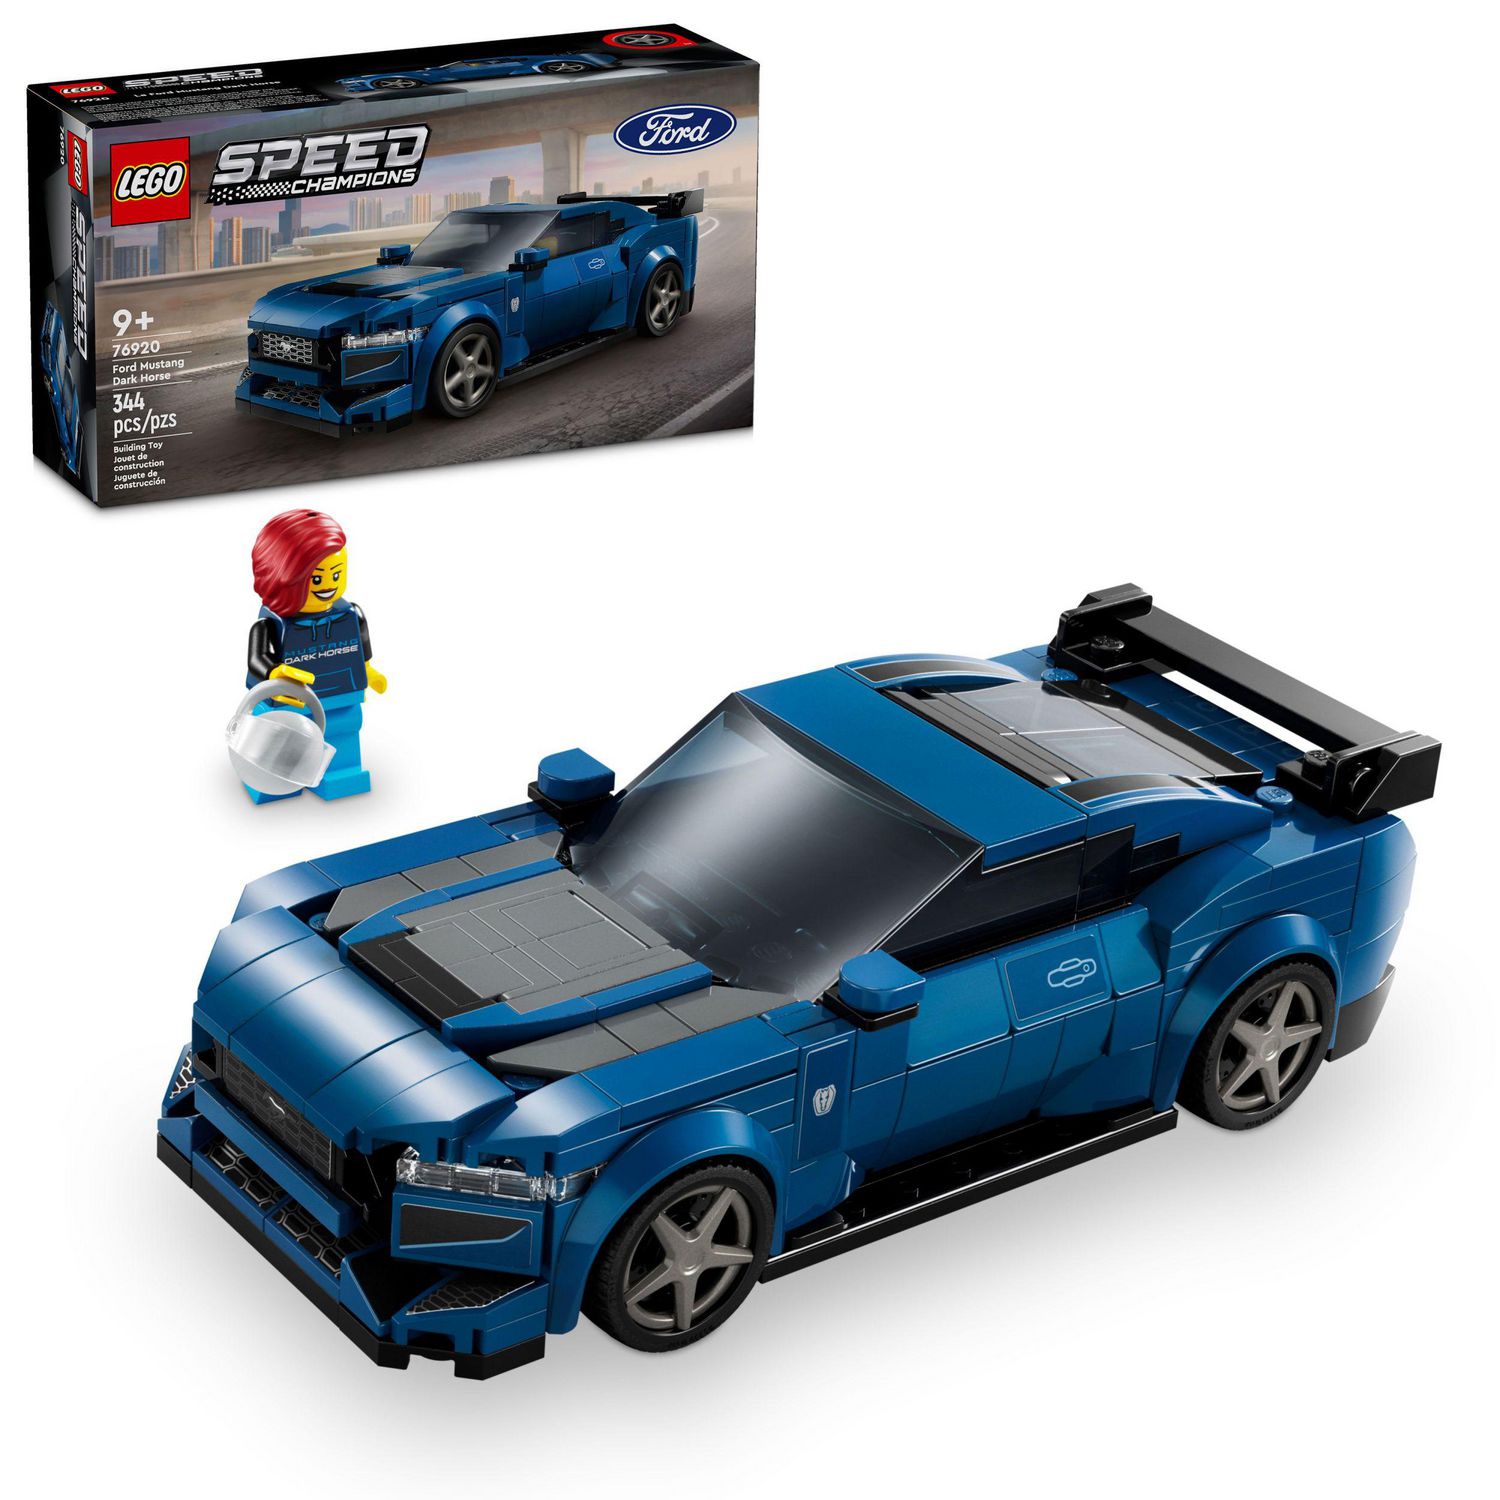 LEGO Speed Champions Ford Mustang Dark Horse Sports Car Toy, Buildable Ford  Mustang Toy for Kids, Blue Toy Car Model Set, Gift Idea for Boys and Girls  Aged 9 Years Old and